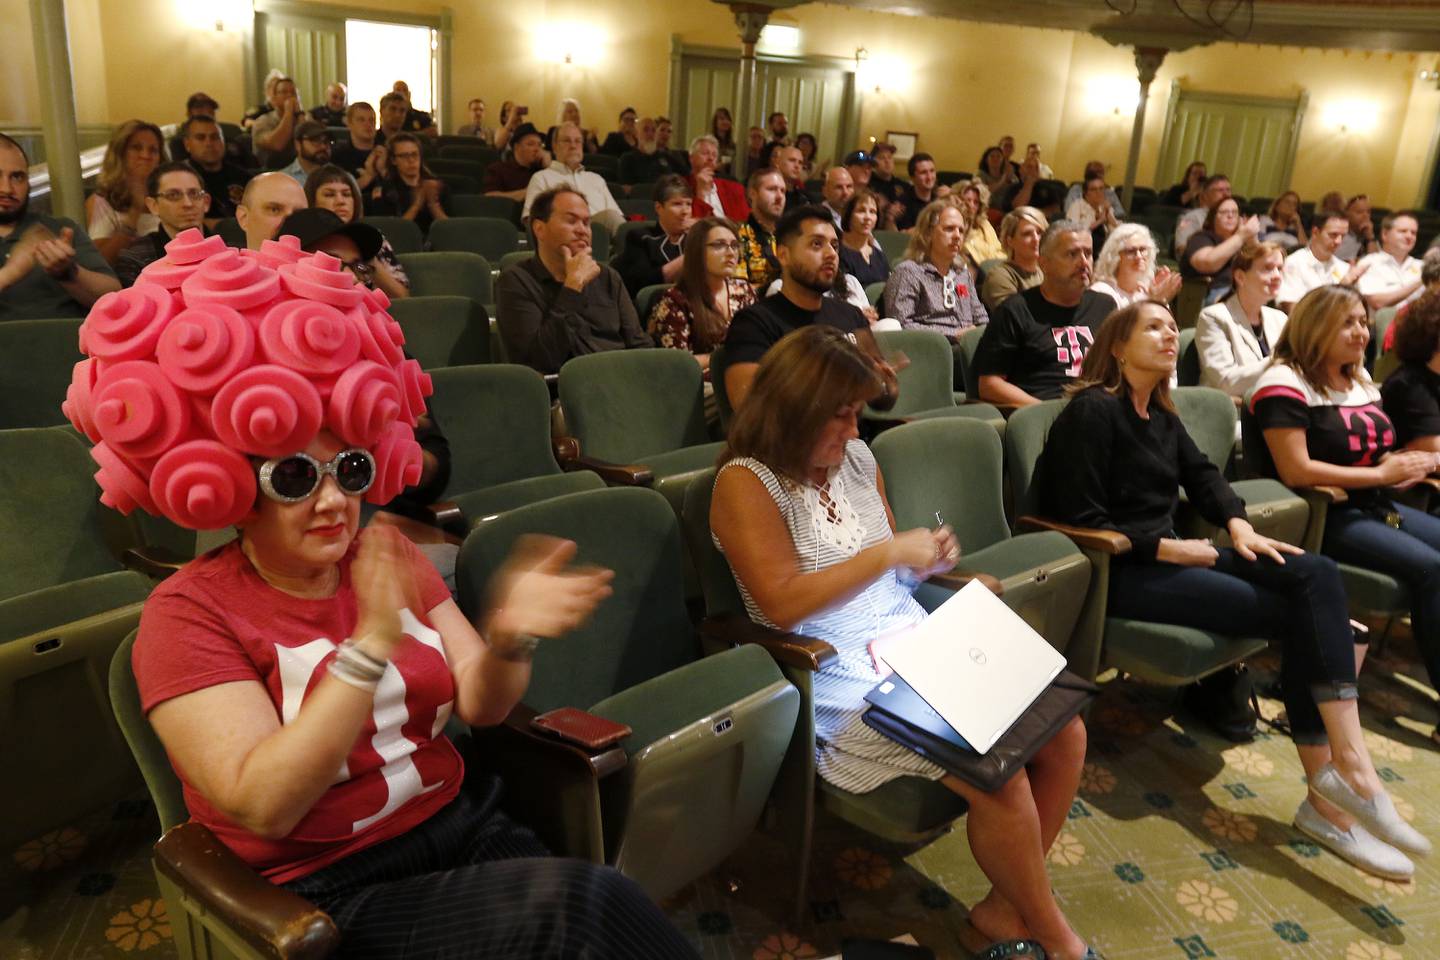 Audience members, including Jodie Kurtz-Osborne of Woodstock, left, applaud inside the Woodstock Opera House as Danielle Gulli announces the city's standing among the top ten finalists in a $3 million grant from T-Mobile on Thursday, July 15, 2021 in Woodstock.